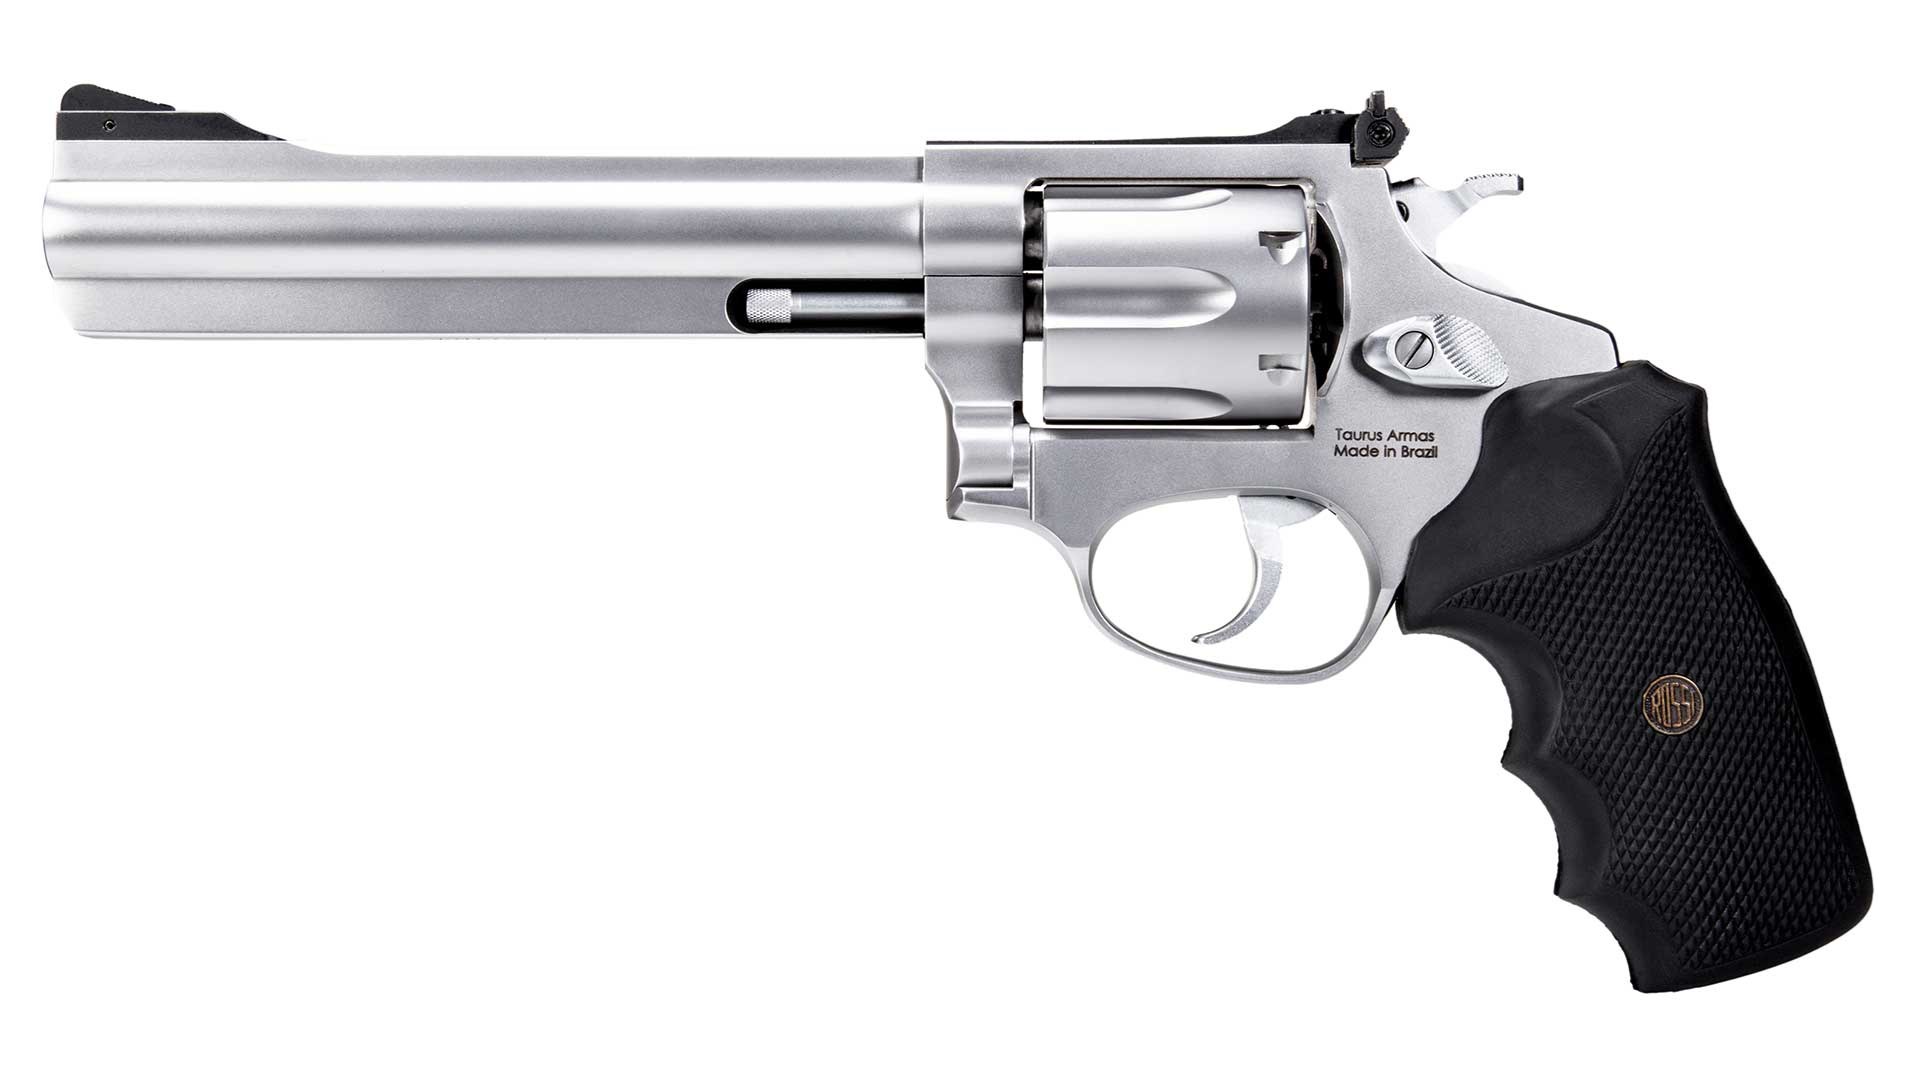 A 6-inch barreled Rossi RM66 stainless-steel revolver's right side shown on white with a squared-off black rubber grip.